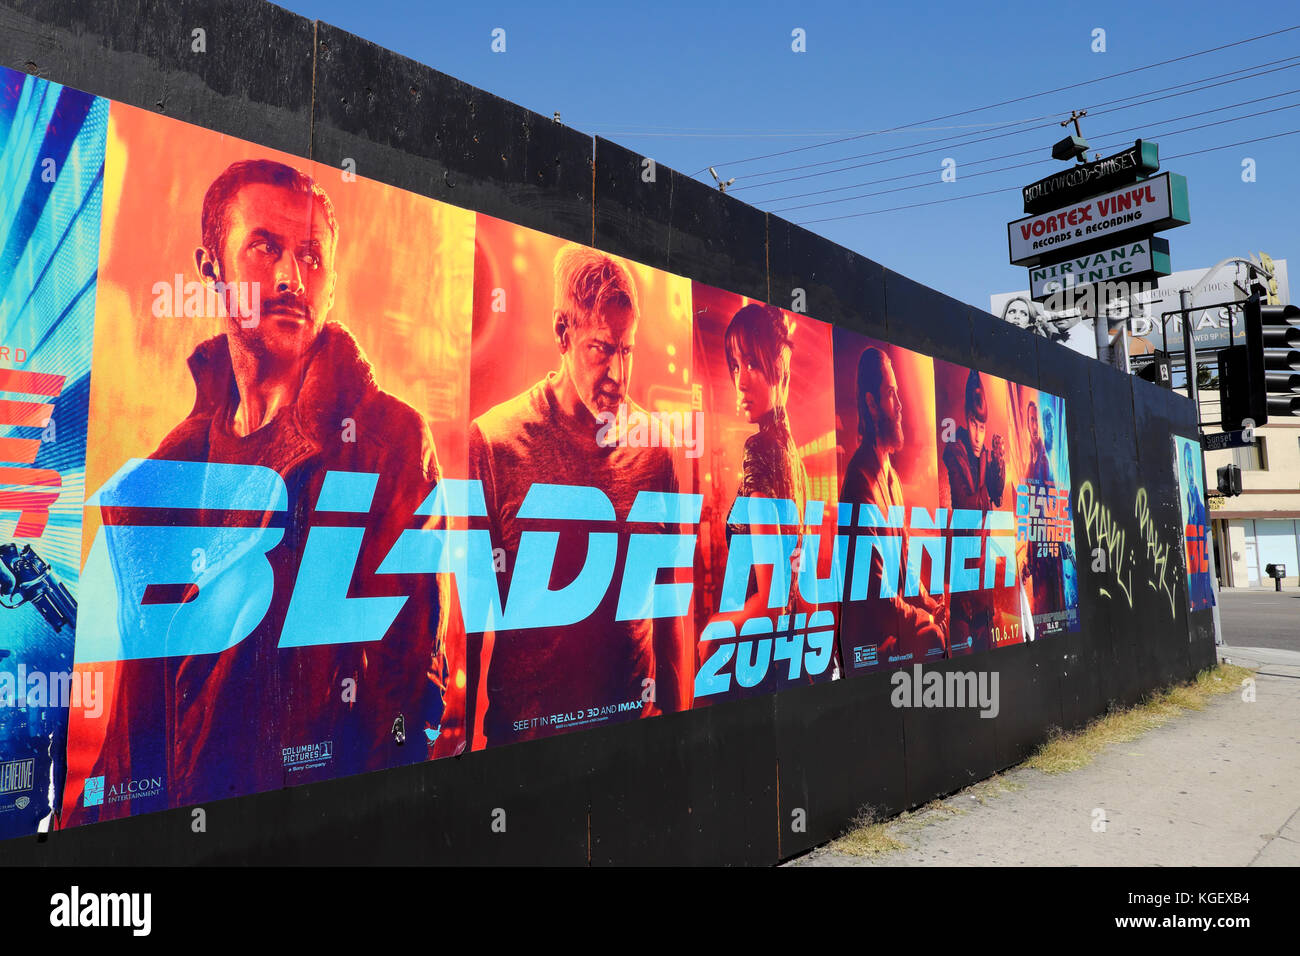 'BLADE RUNNER 2049' advertising poster billboard on a hoarding at Hollywood and Sunset Boulevard in Los Angeles, California  KATHY DEWITT Stock Photo